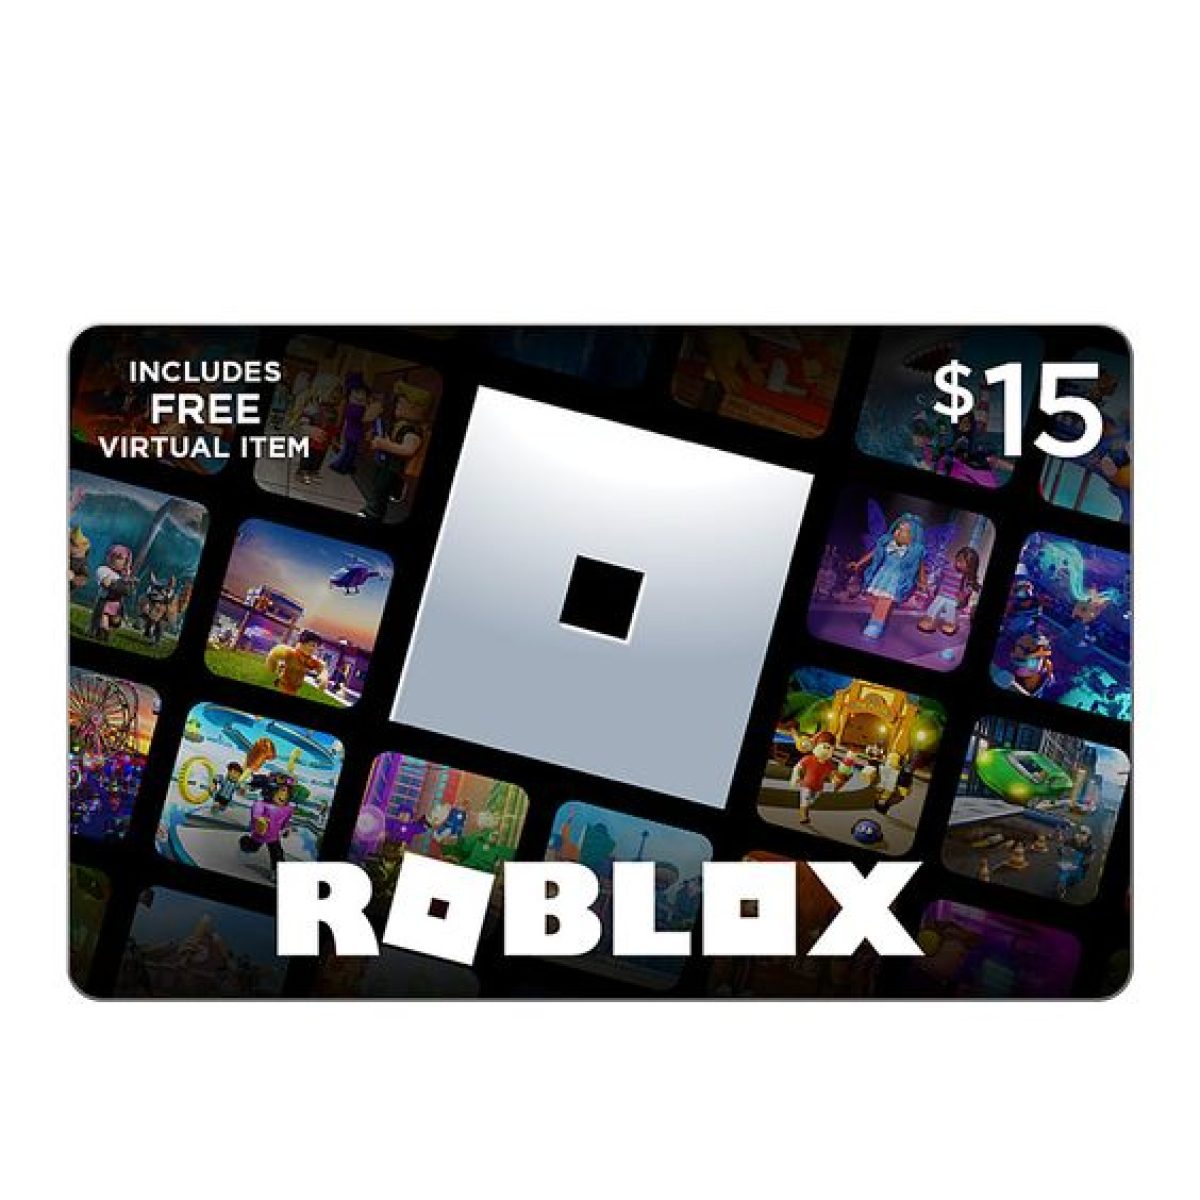 Where To Redeem Roblox Gift Card In Nigeria - CardVest